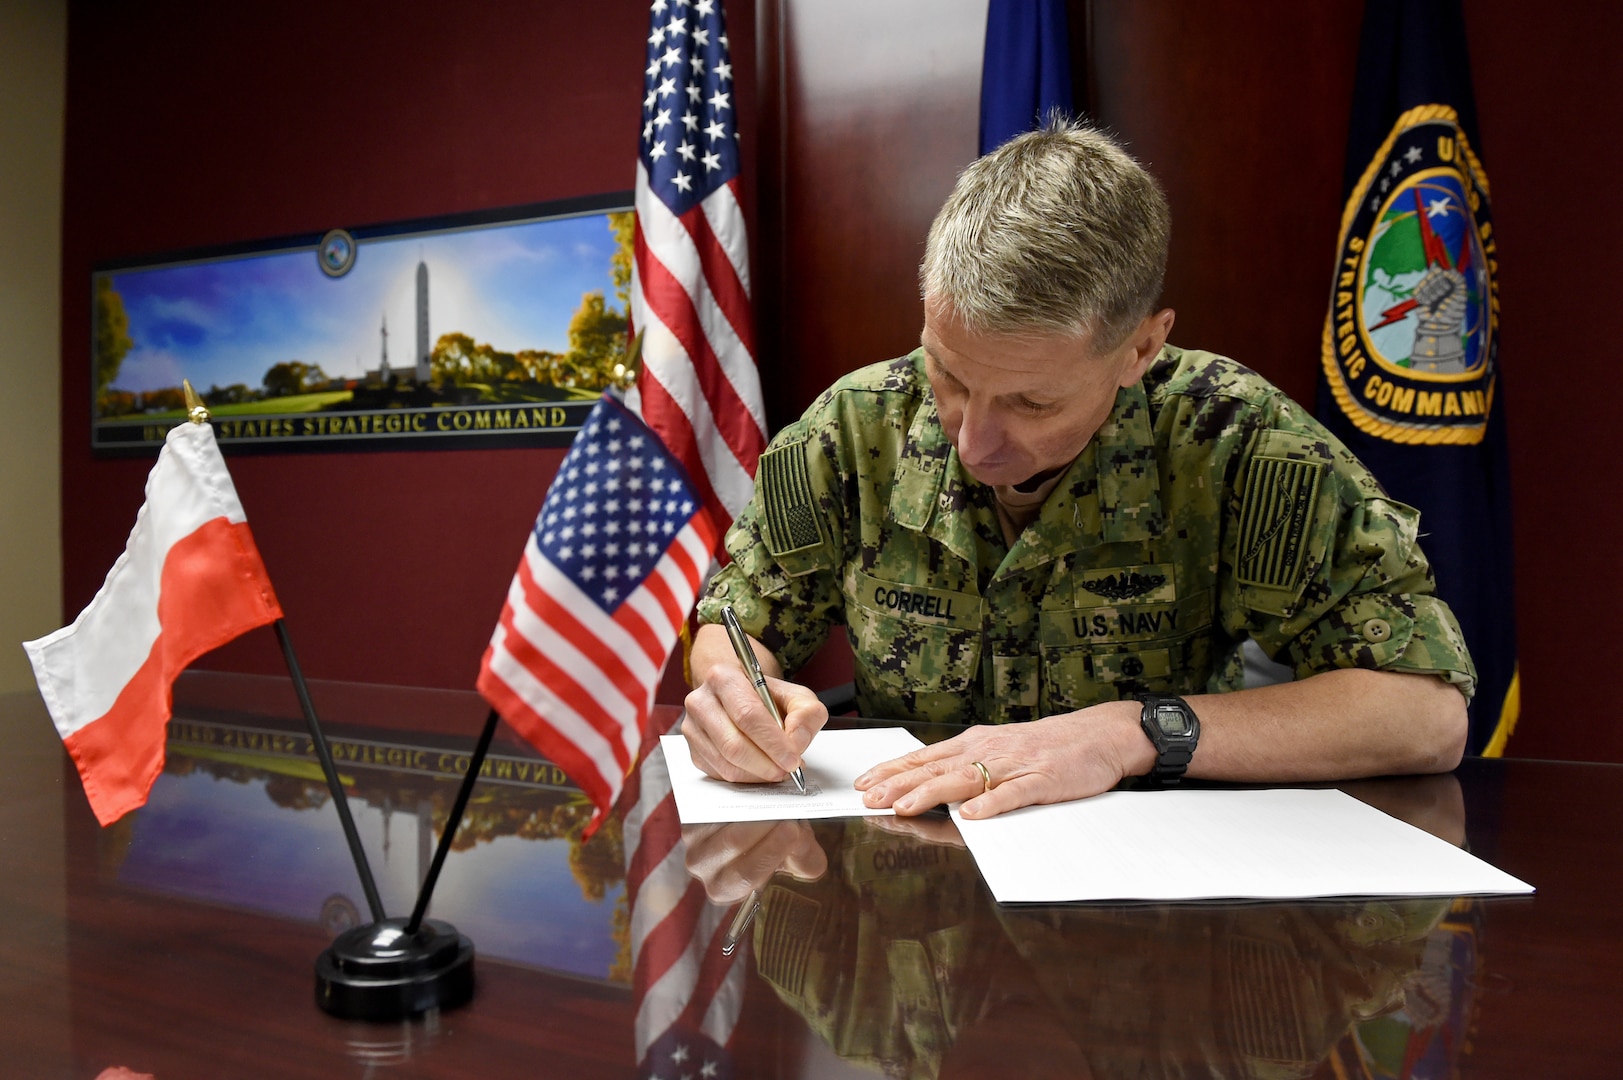 U.S. Navy Rear Adm. Richard Correll, U.S. Strategic Command (USSTRATCOM) director of plans and policy, signs an agreement to share space situational awareness (SSA) services and information with the Polish Space Agency at USSTRATCOM headquarters on Offutt Air Force Base, Neb., April 4, 2019. Correll signed the agreement as part of a larger effort to support spaceflight planning and enhance the safety, stability and sustainability of space operations. Poland joins 18 nations, two intergovernmental organizations, and 77 commercial satellite owners, operators, launchers already participating in SSA data-sharing agreements with USSTRATCOM.